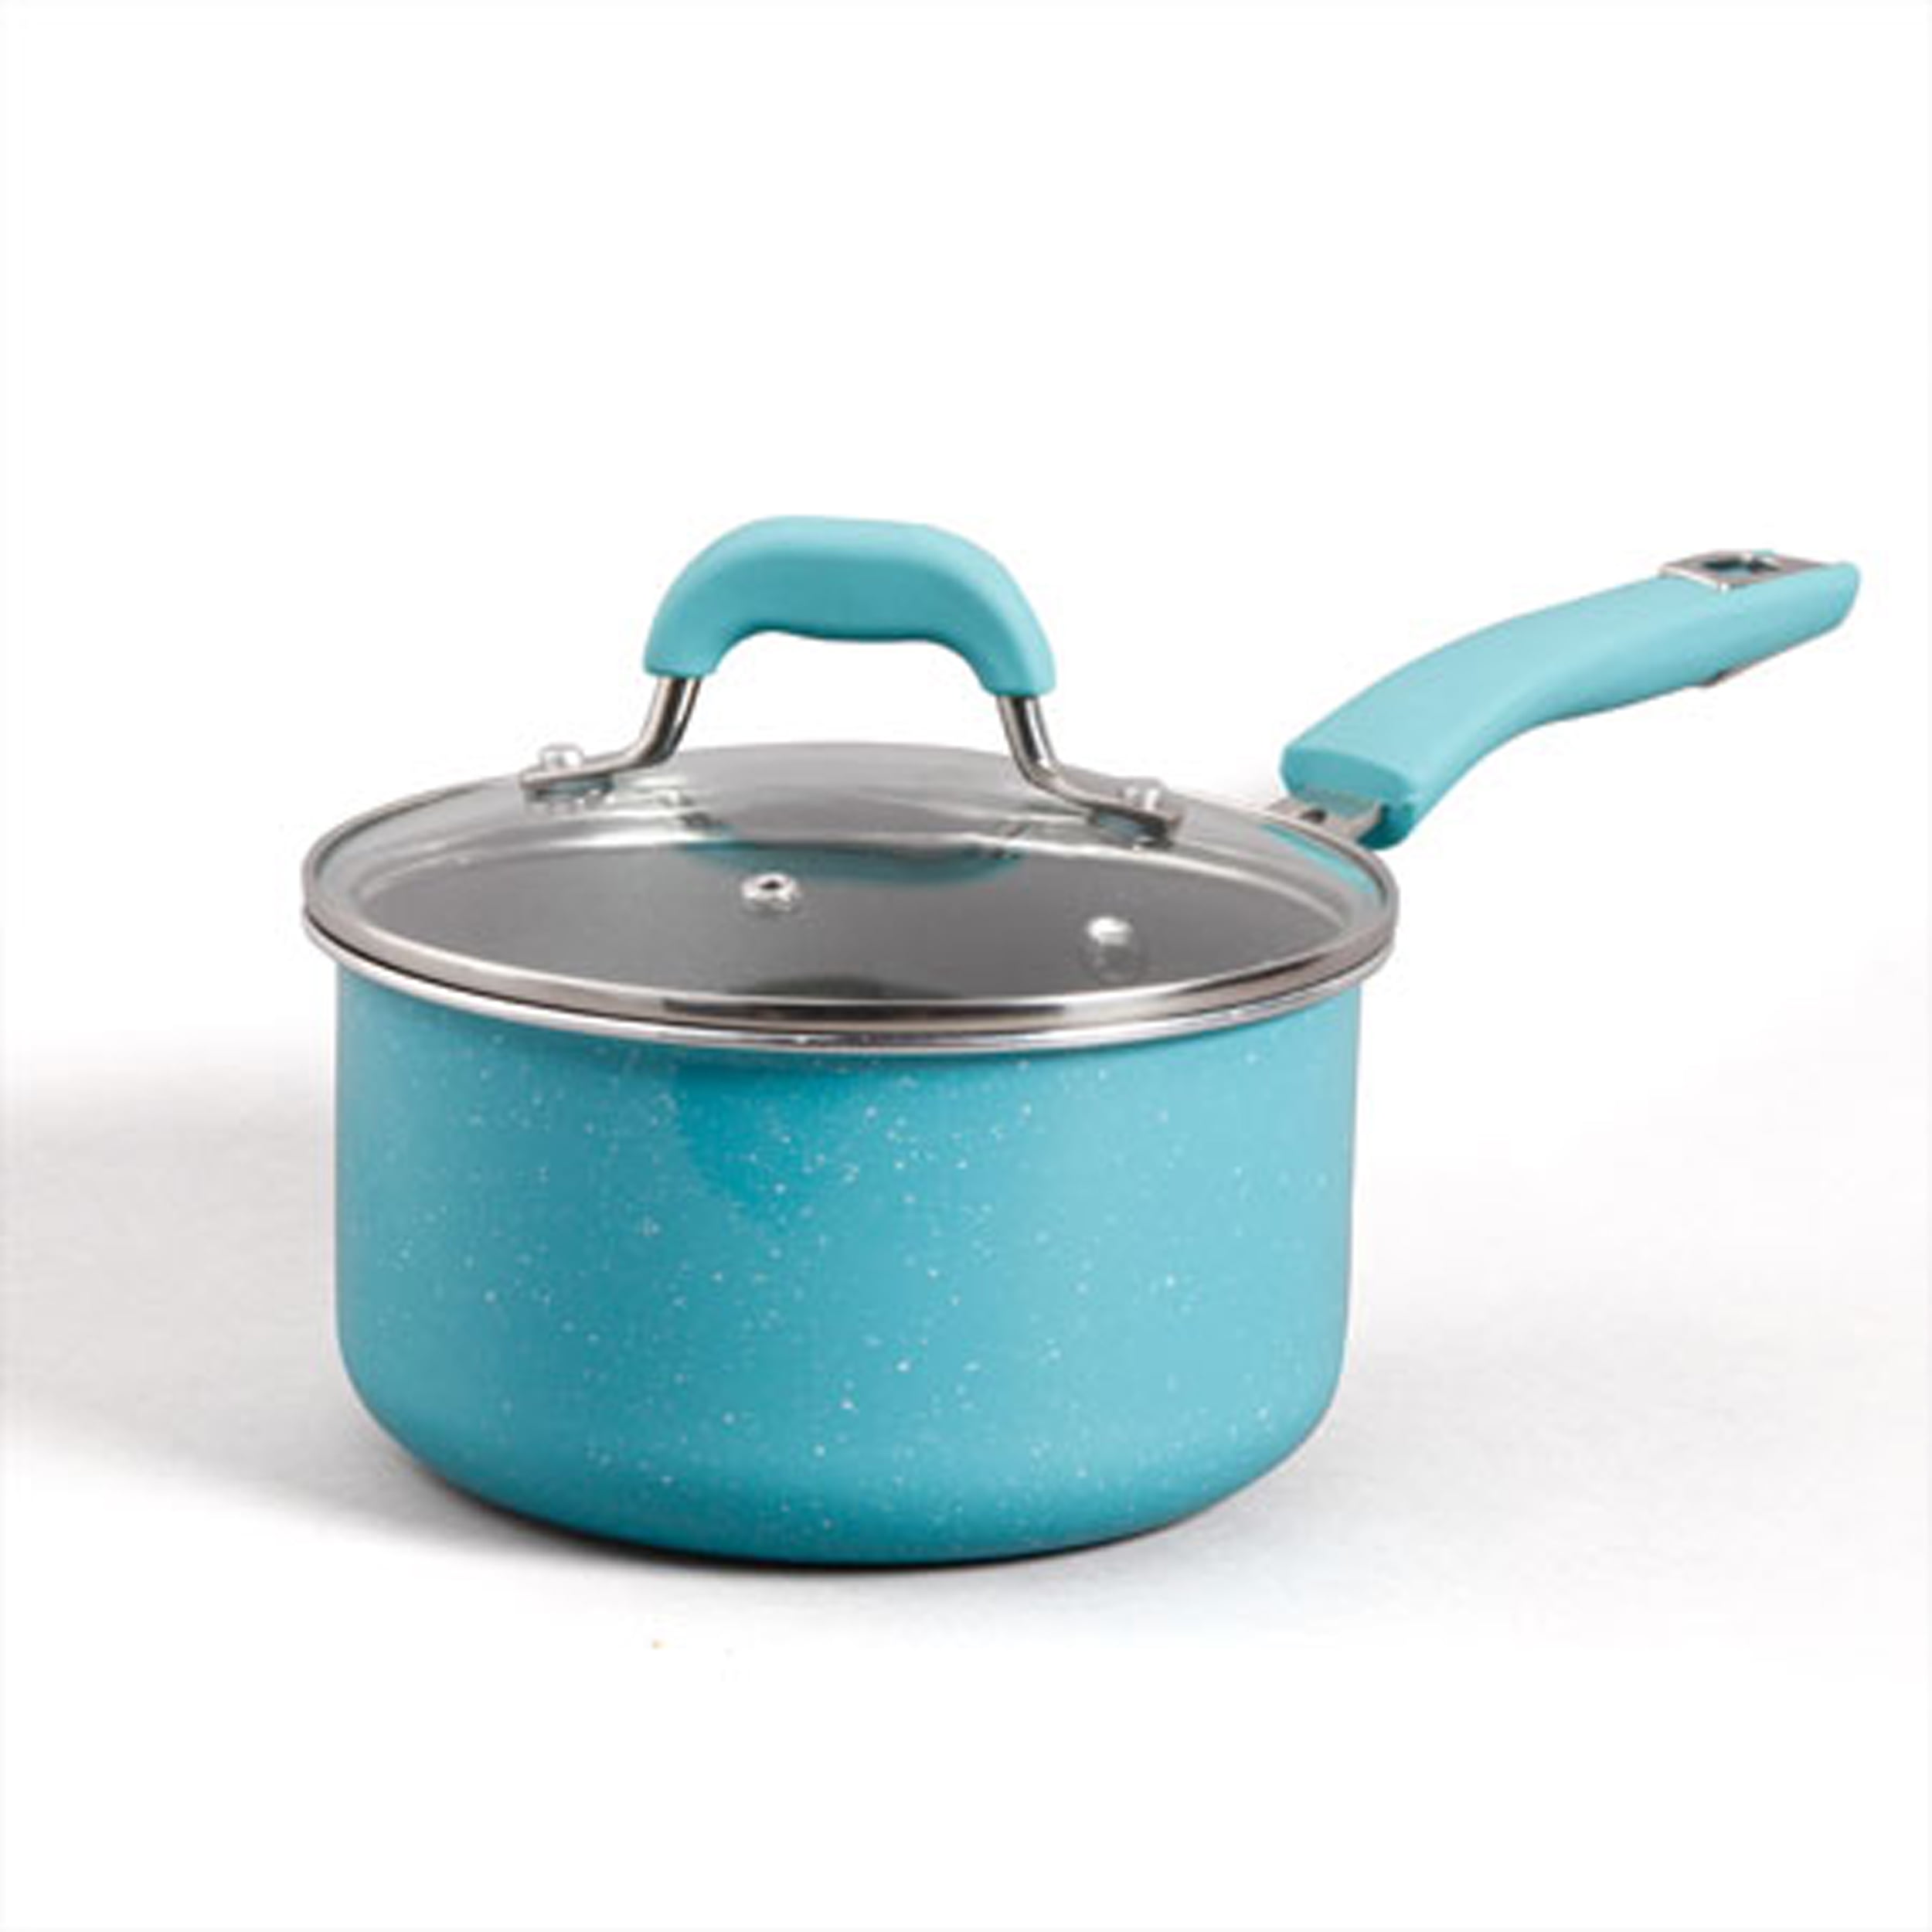 The Pioneer Woman Sweet Romance 30-Piece Nonstick Cookware Set, Turquoise